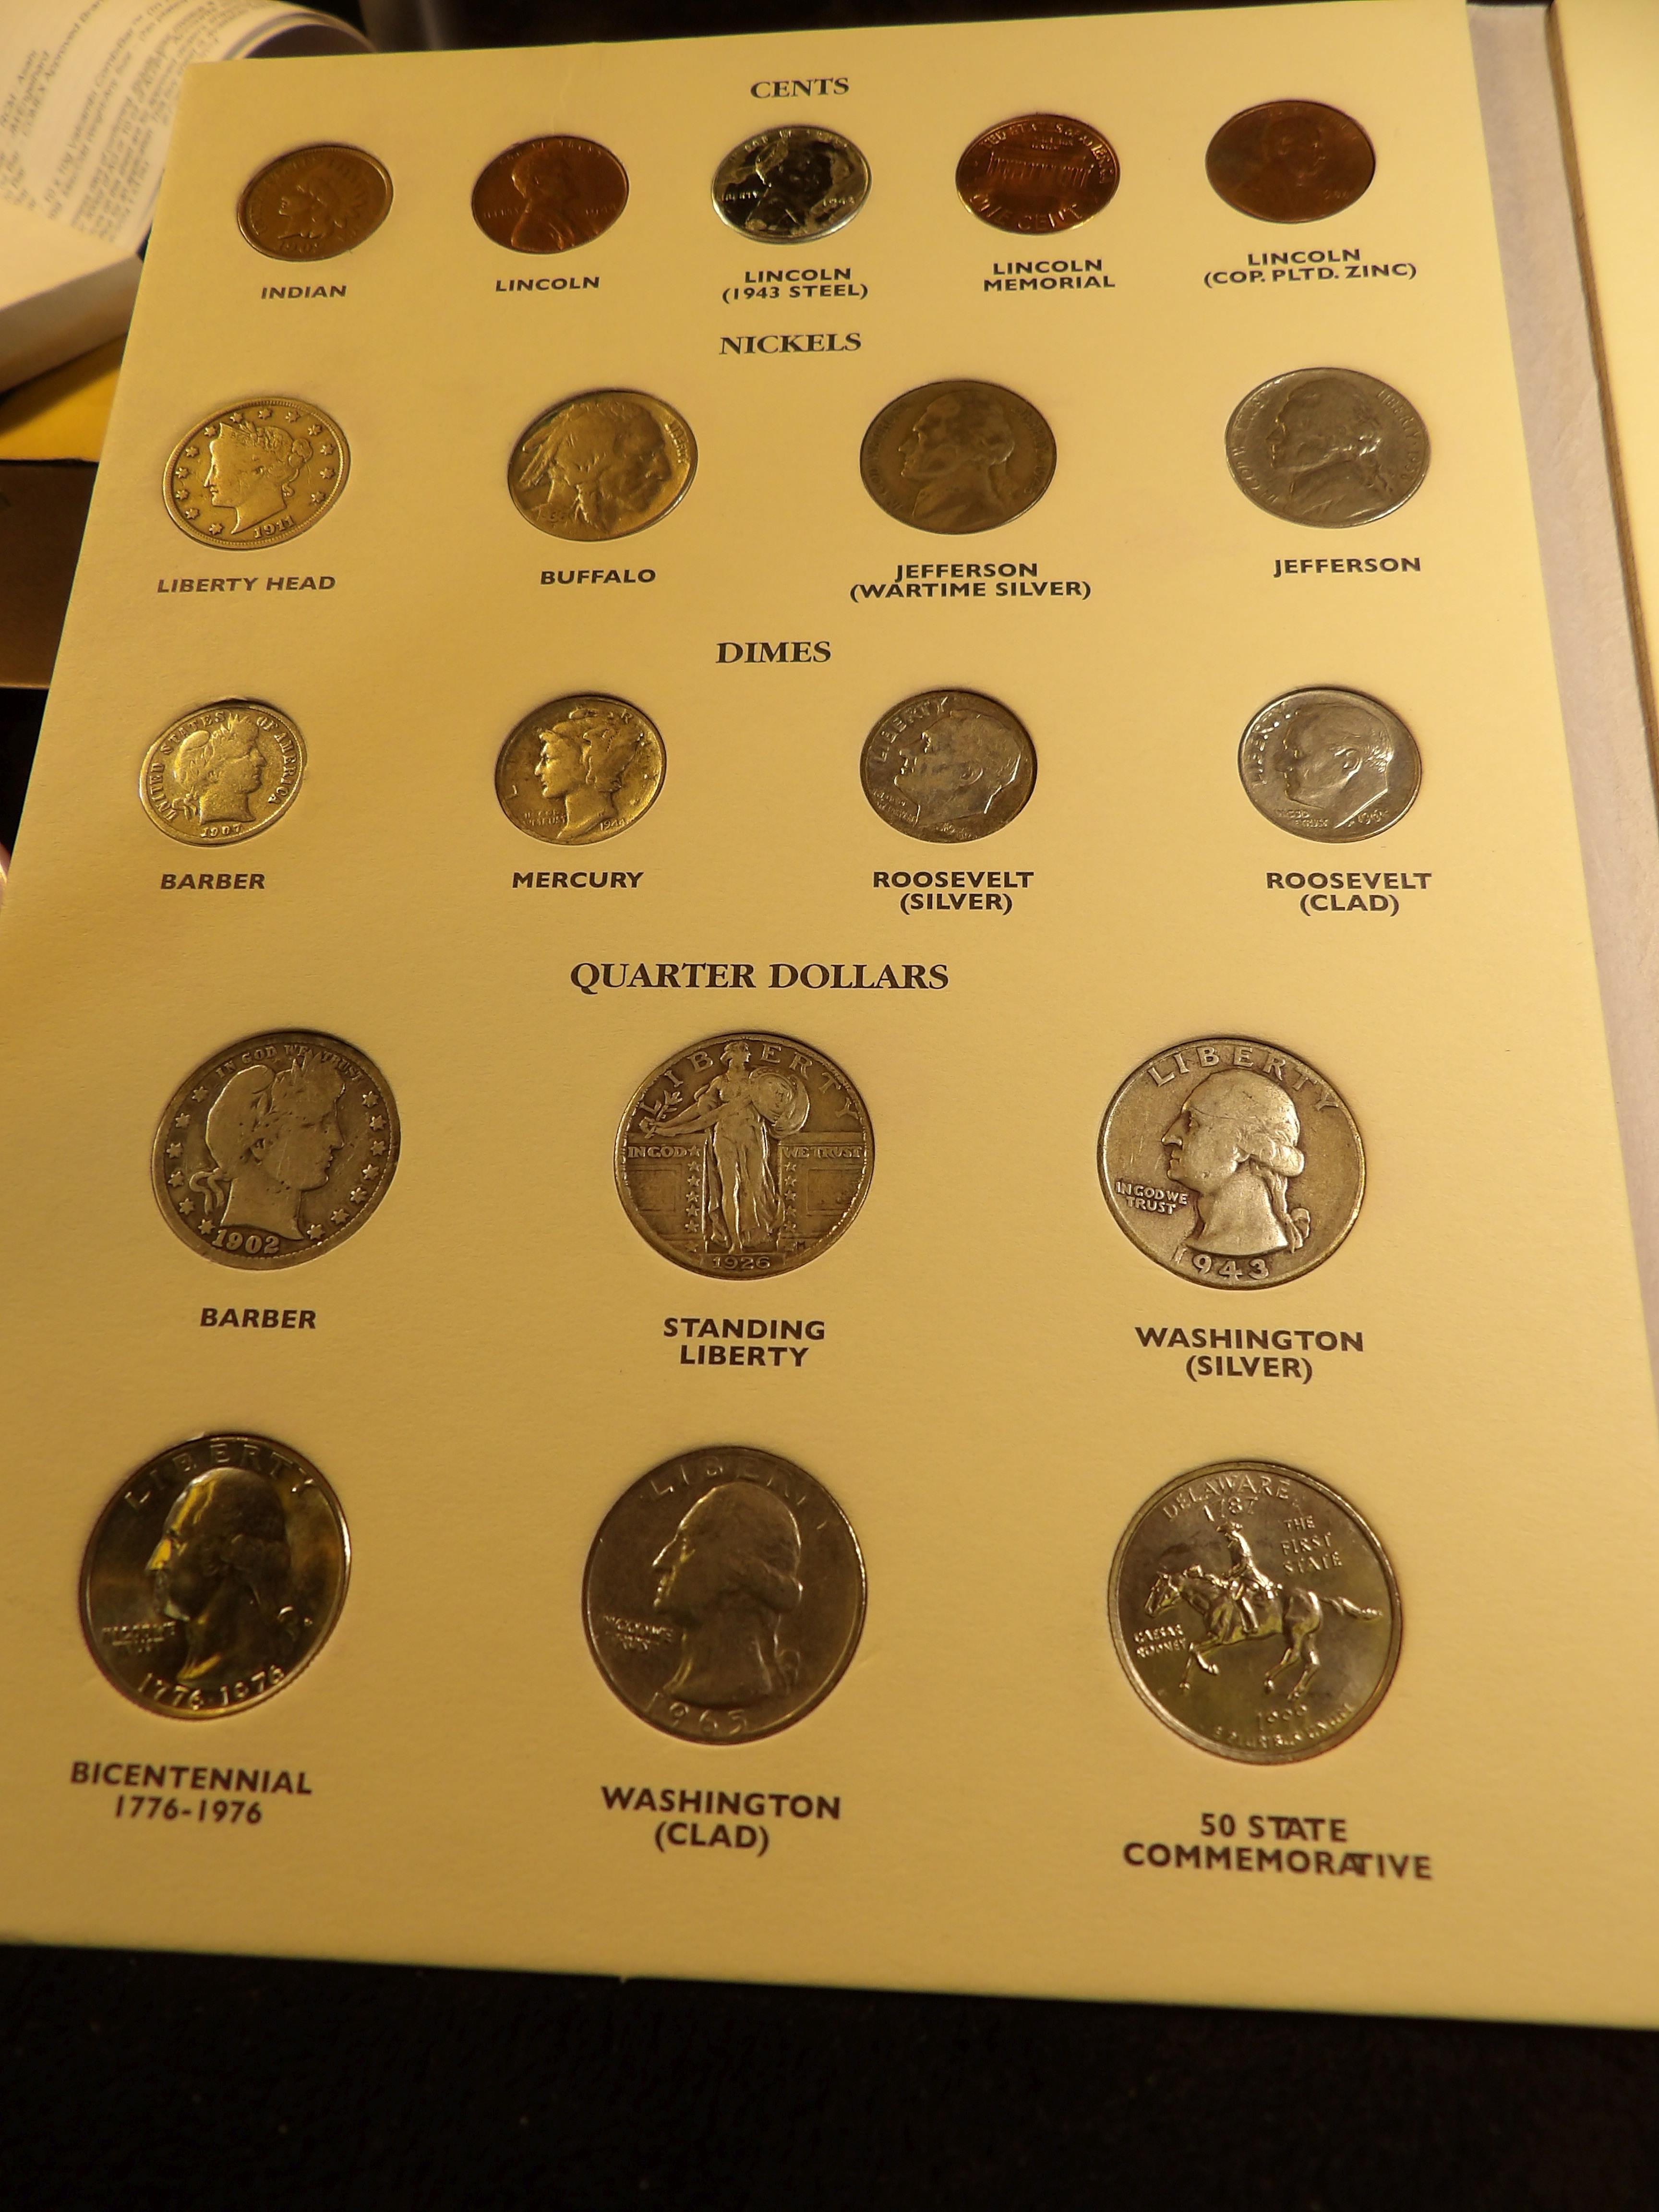 Twentieth Century Type Set with great looking coins in a Littleton Archival Album.